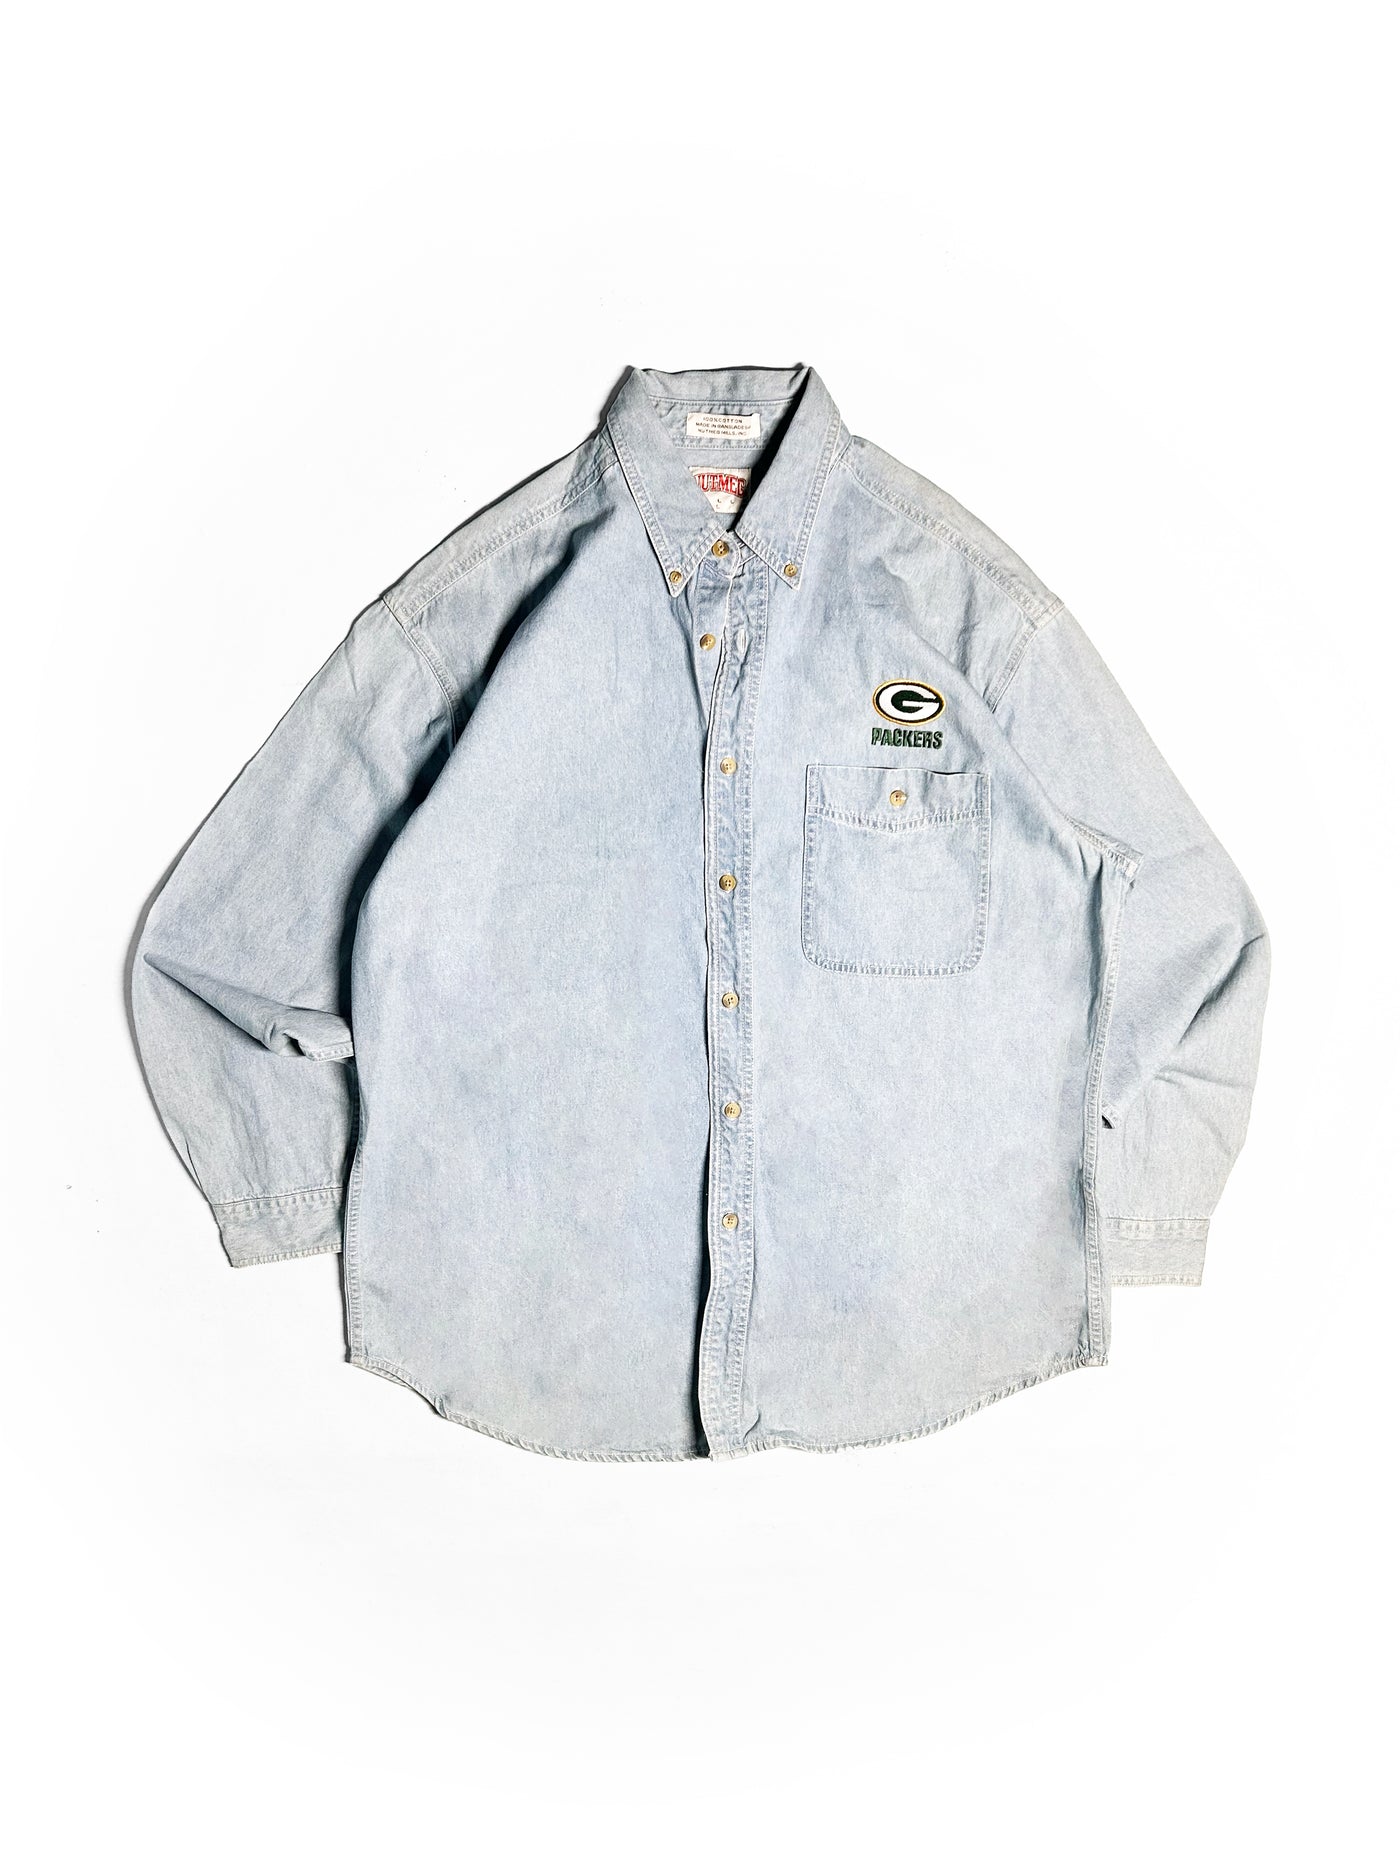 Vintage 90s Green Bay Packers Denim Button Up